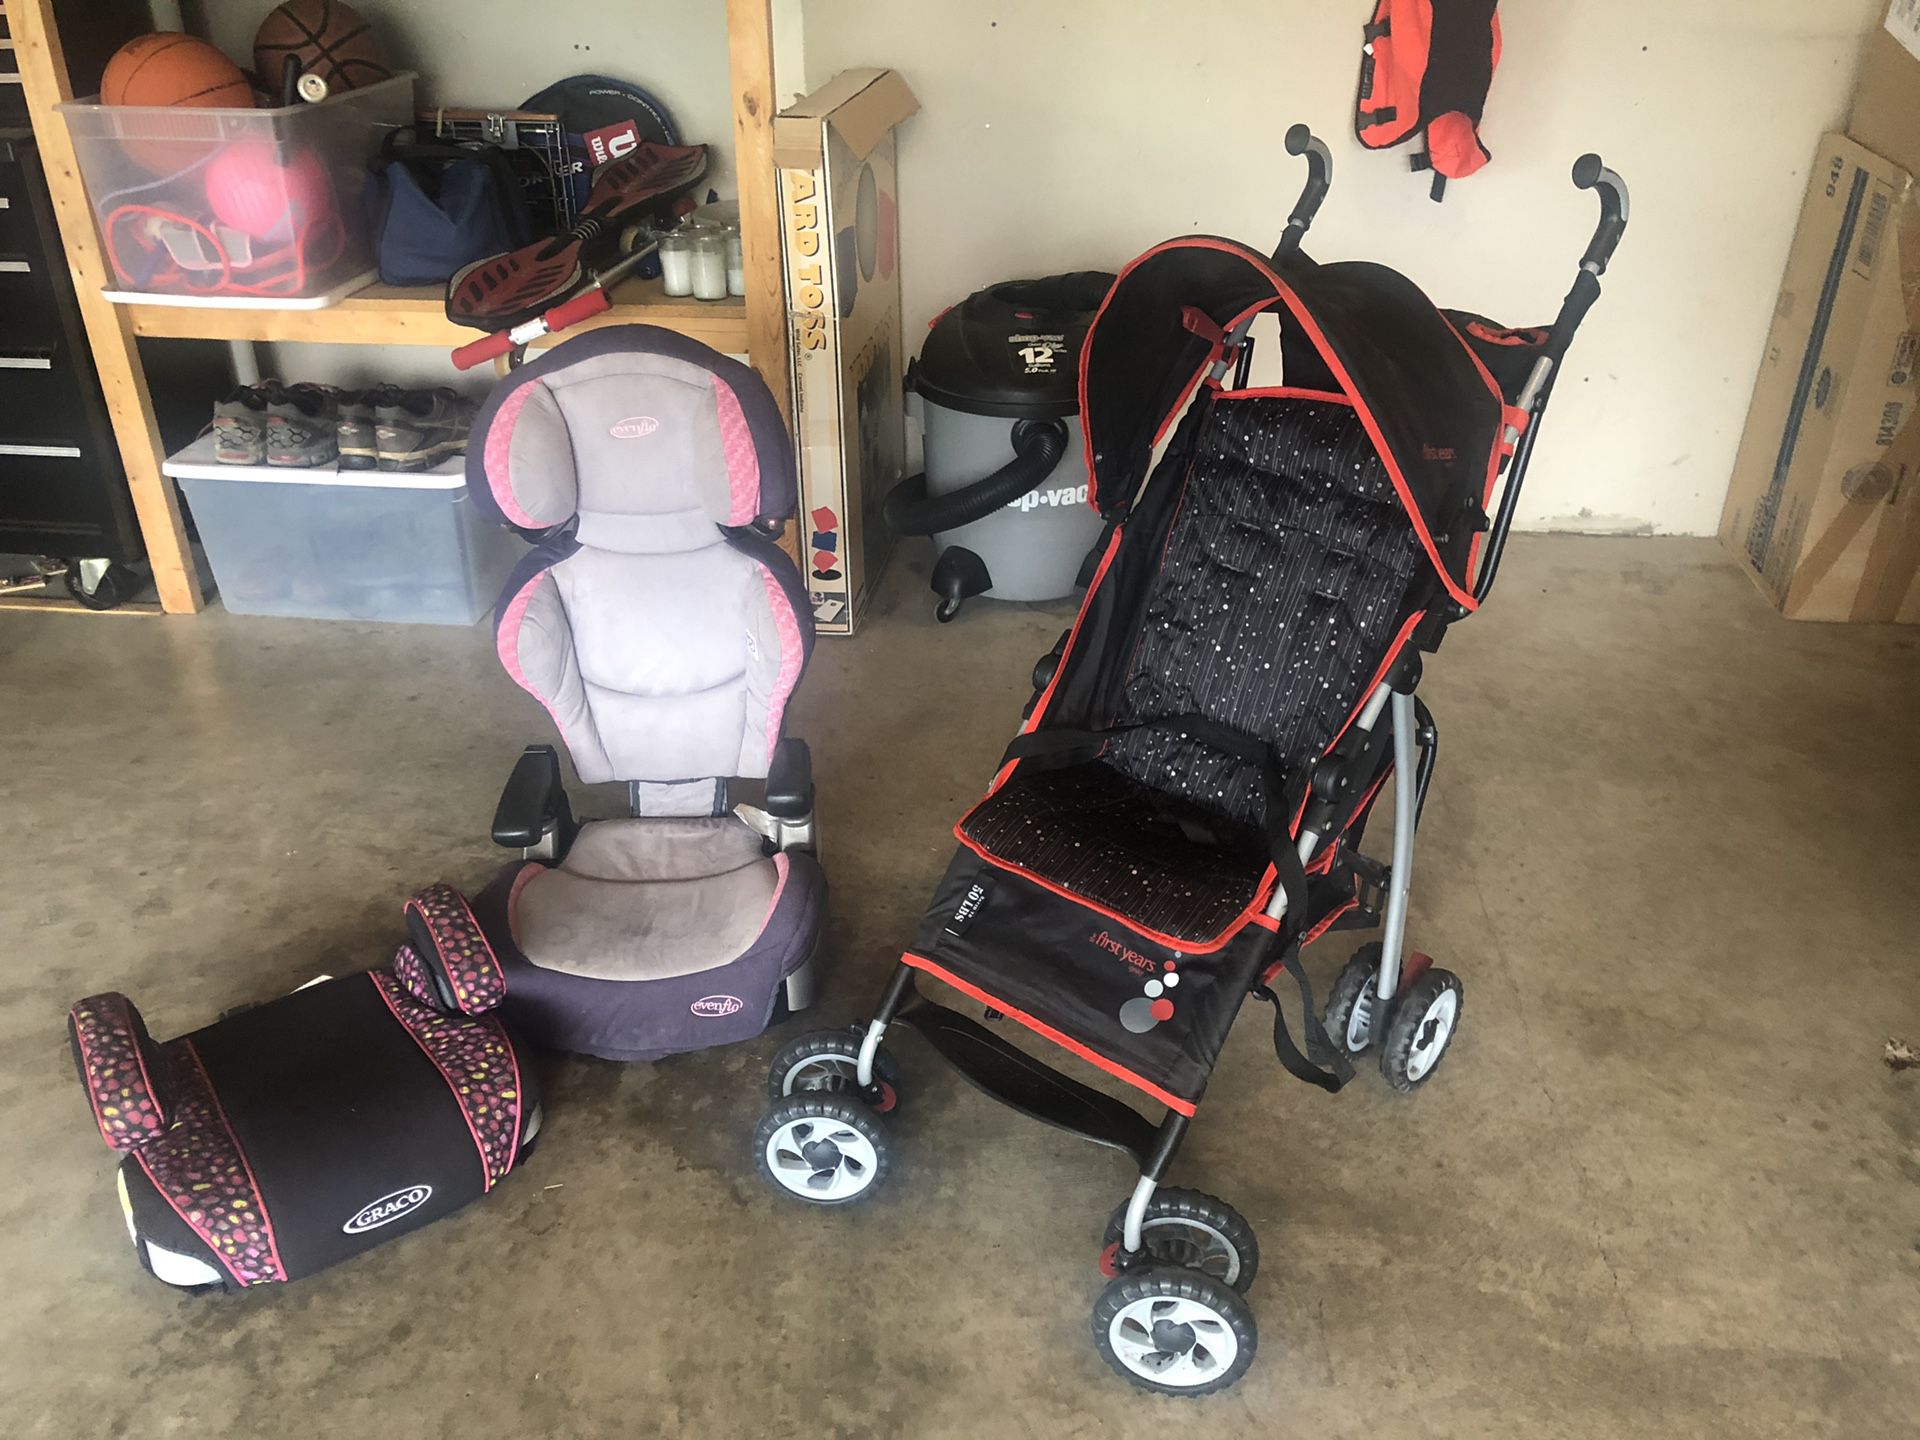 Booster seats and stroller